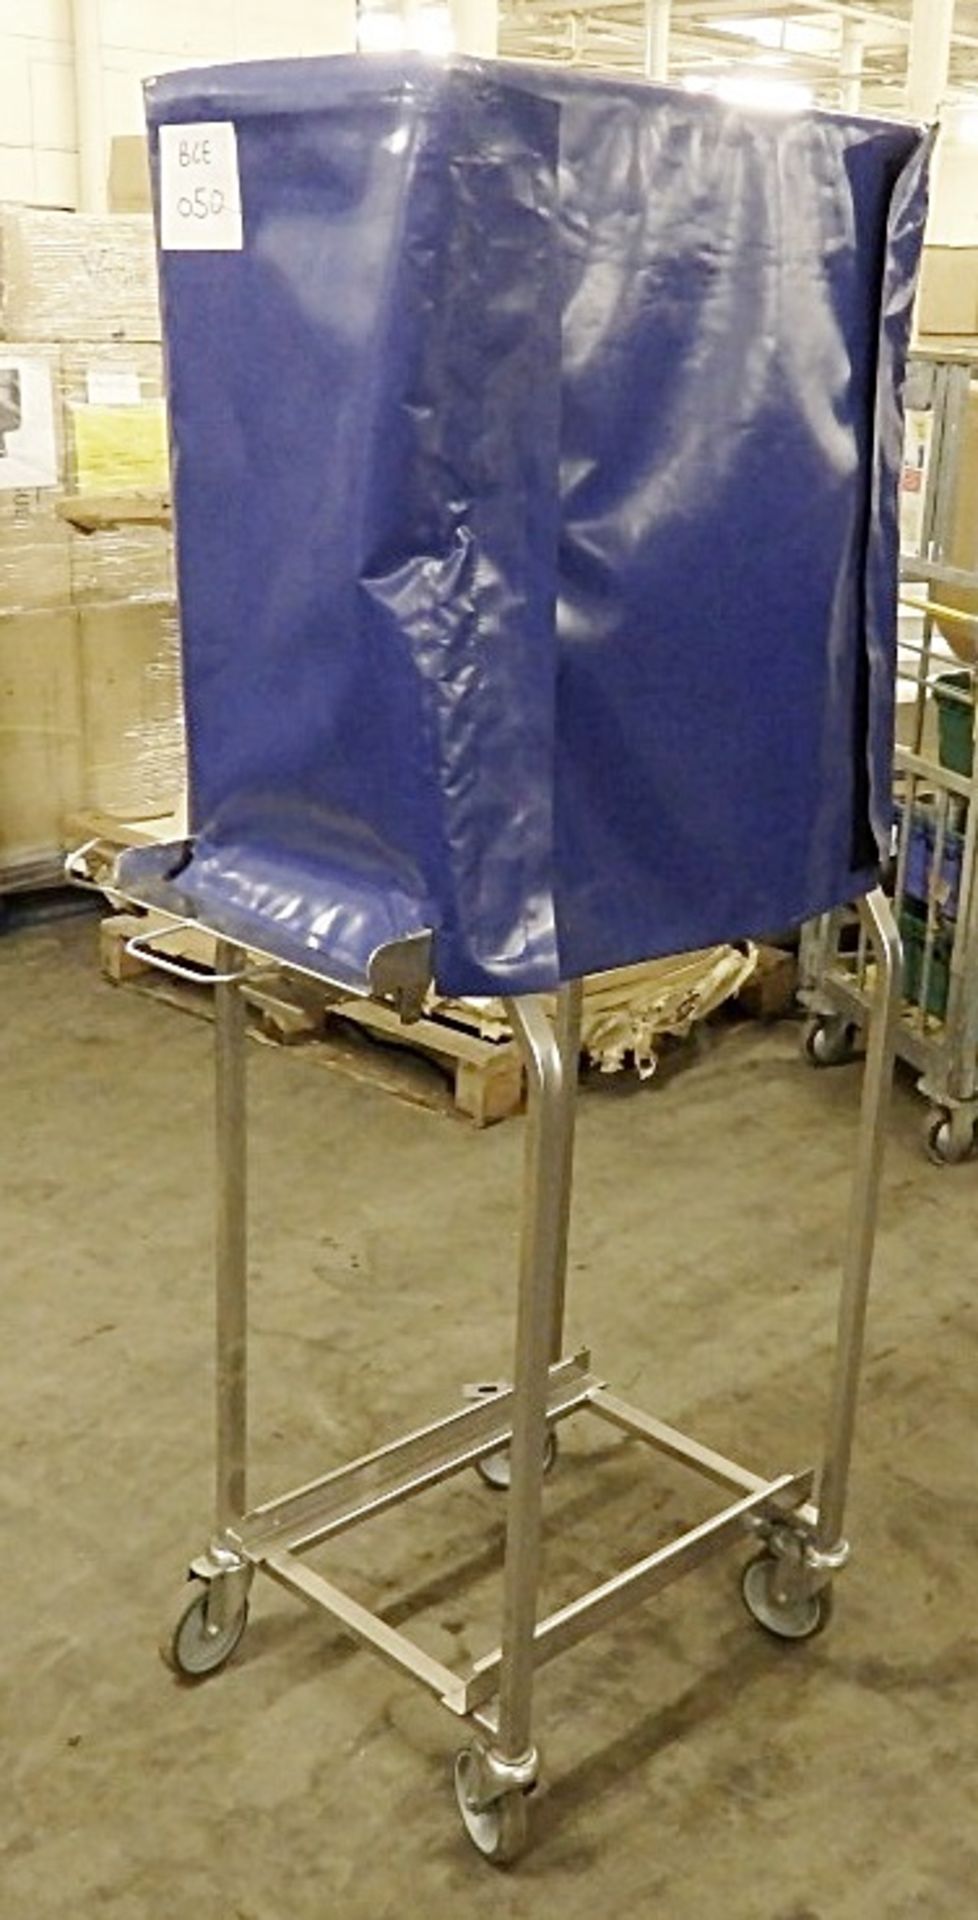 1 x Stainless Steel Plate Rack / Trolley With Thermal Cover -  Only Used Once Before - 31 Plate - Image 6 of 7